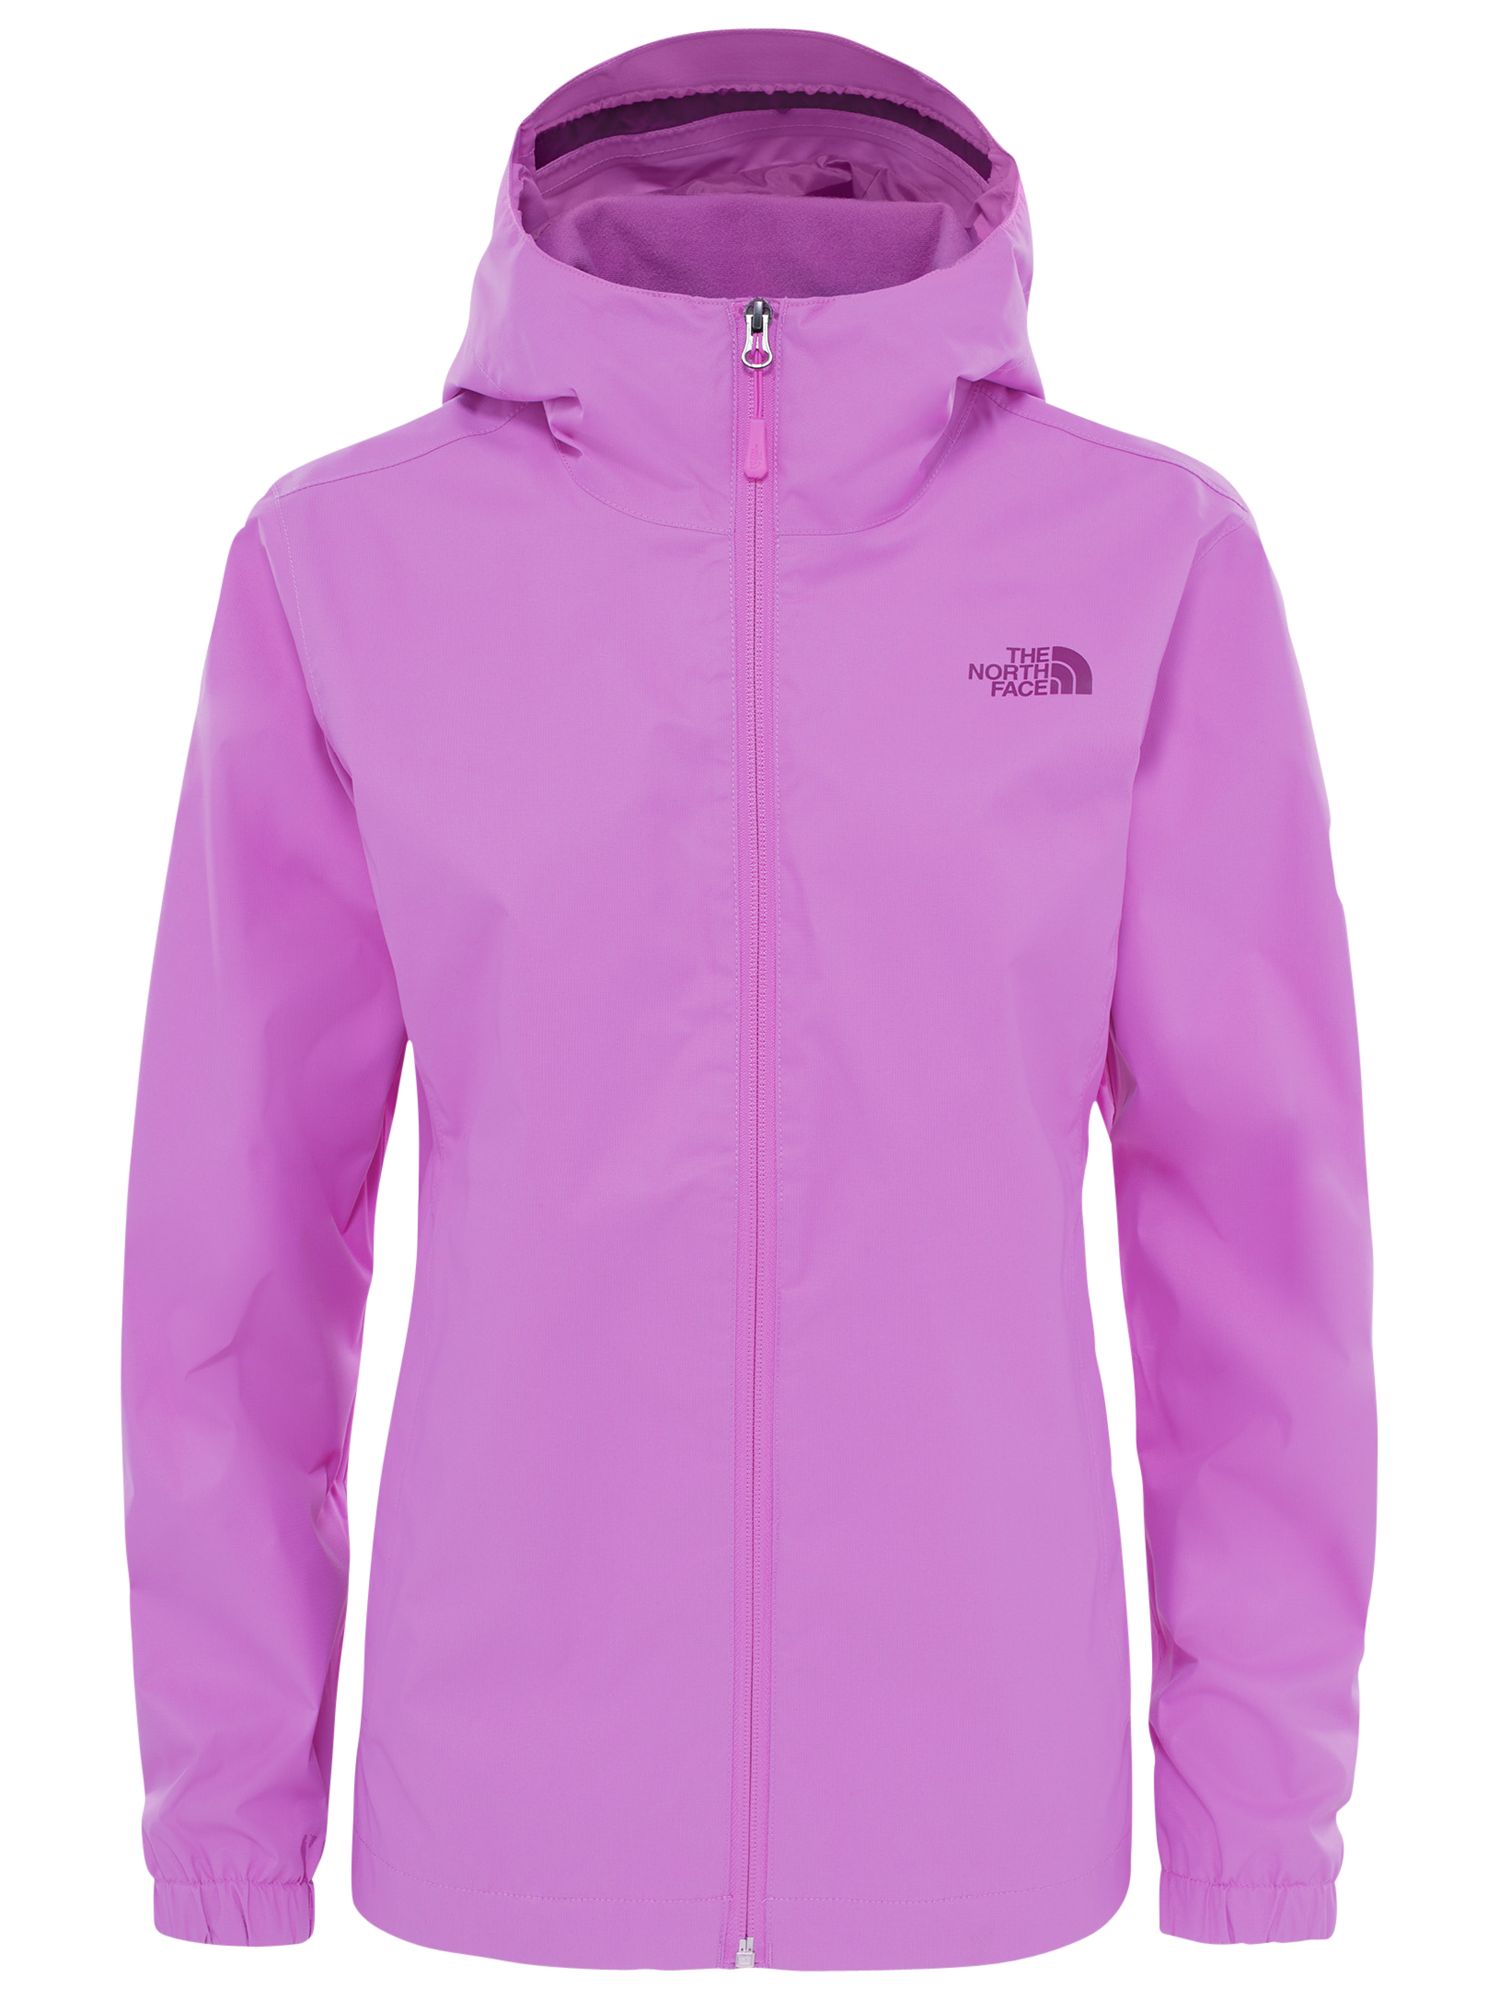 The North Face Quest Waterproof Women's Jacket